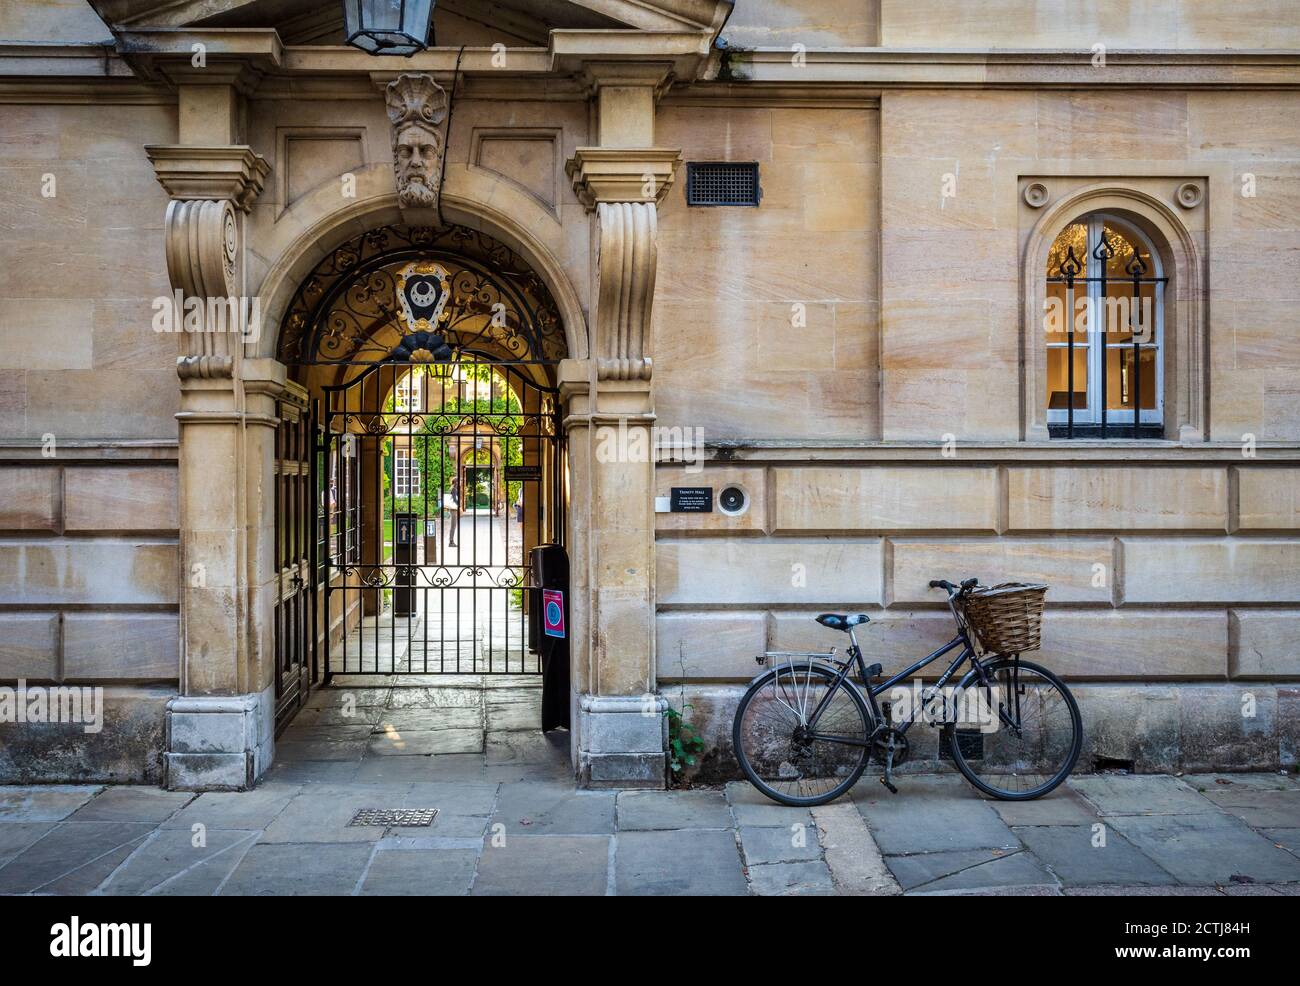 Trinity Hall College Cambridge. Part of Cambridge University, founded in 1350. Main entrance to Trinity Hall College, University of Cambridge. Stock Photo